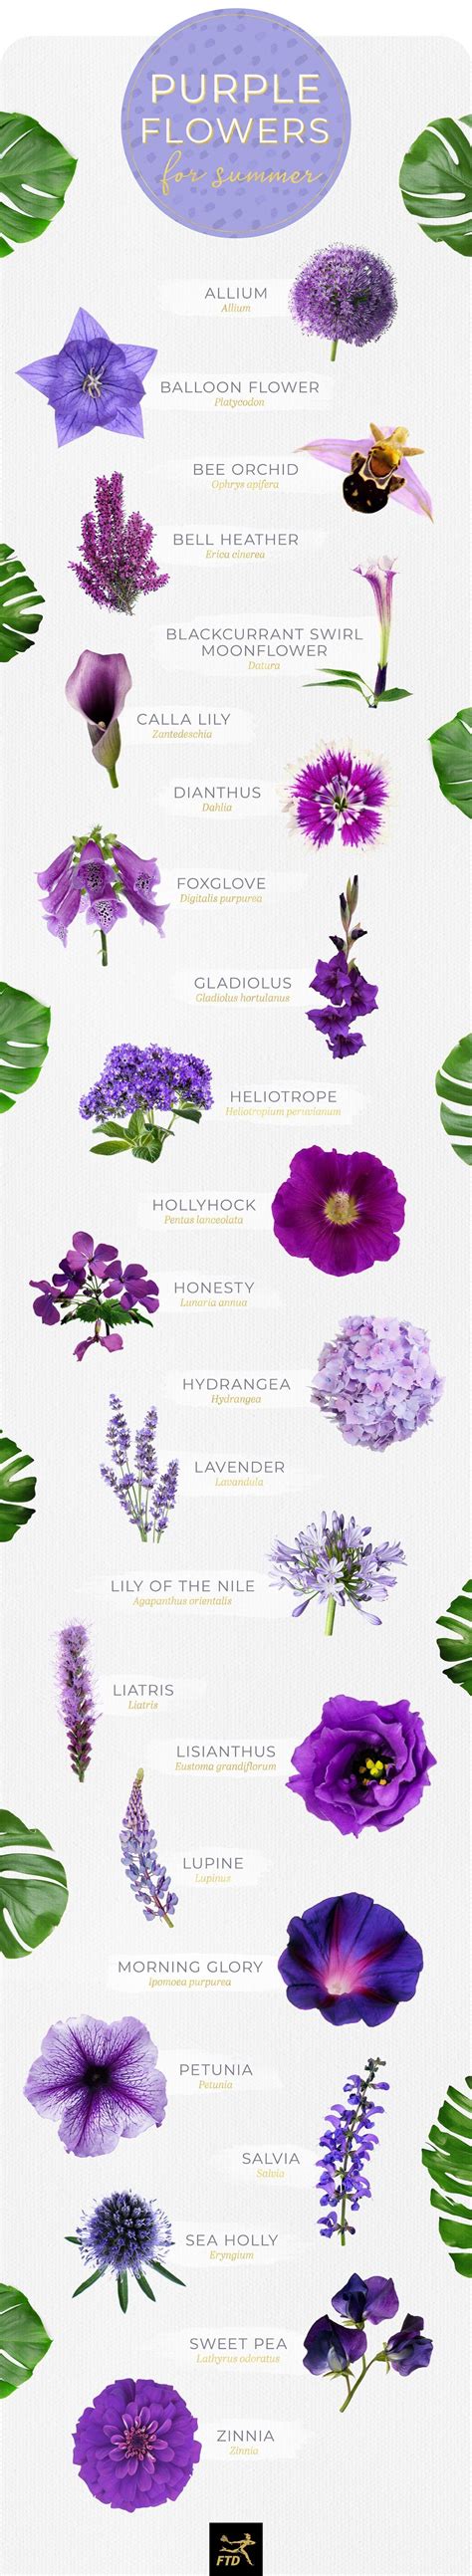 Types Of Purple Flowers With Names Sschool Age Activities For Daycare